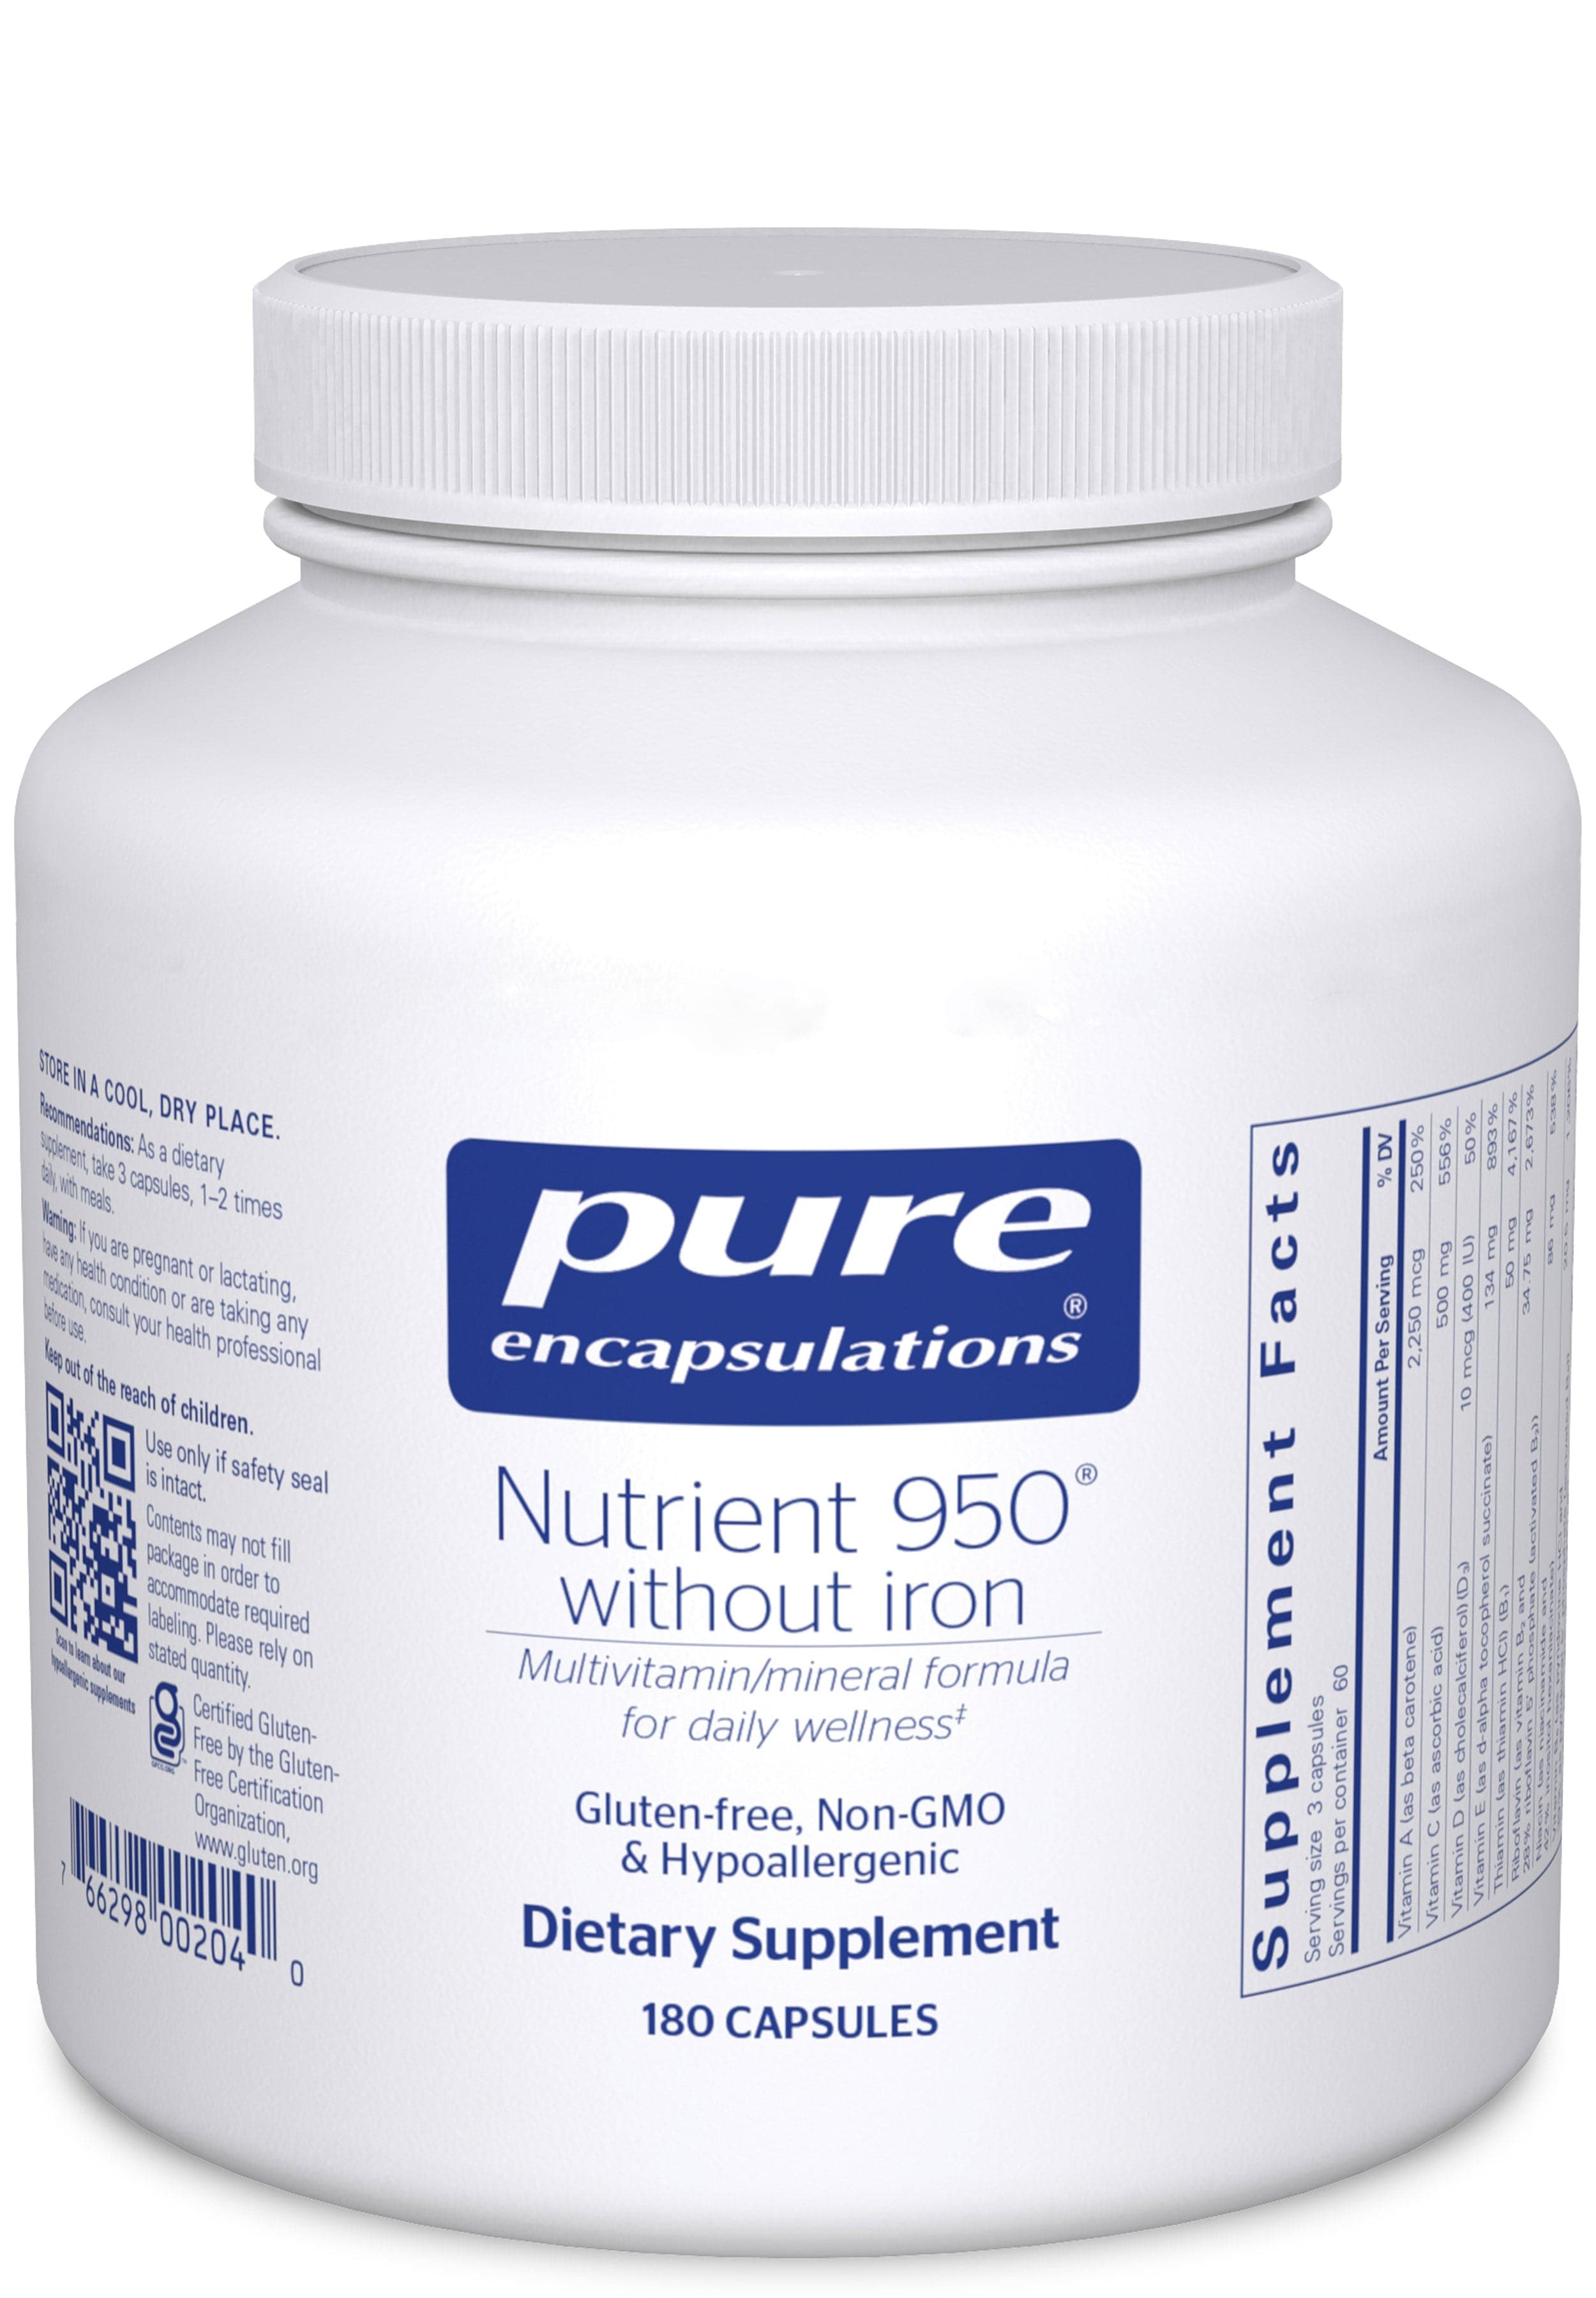 Pure Encapsulations Nutrient 950 without Iron